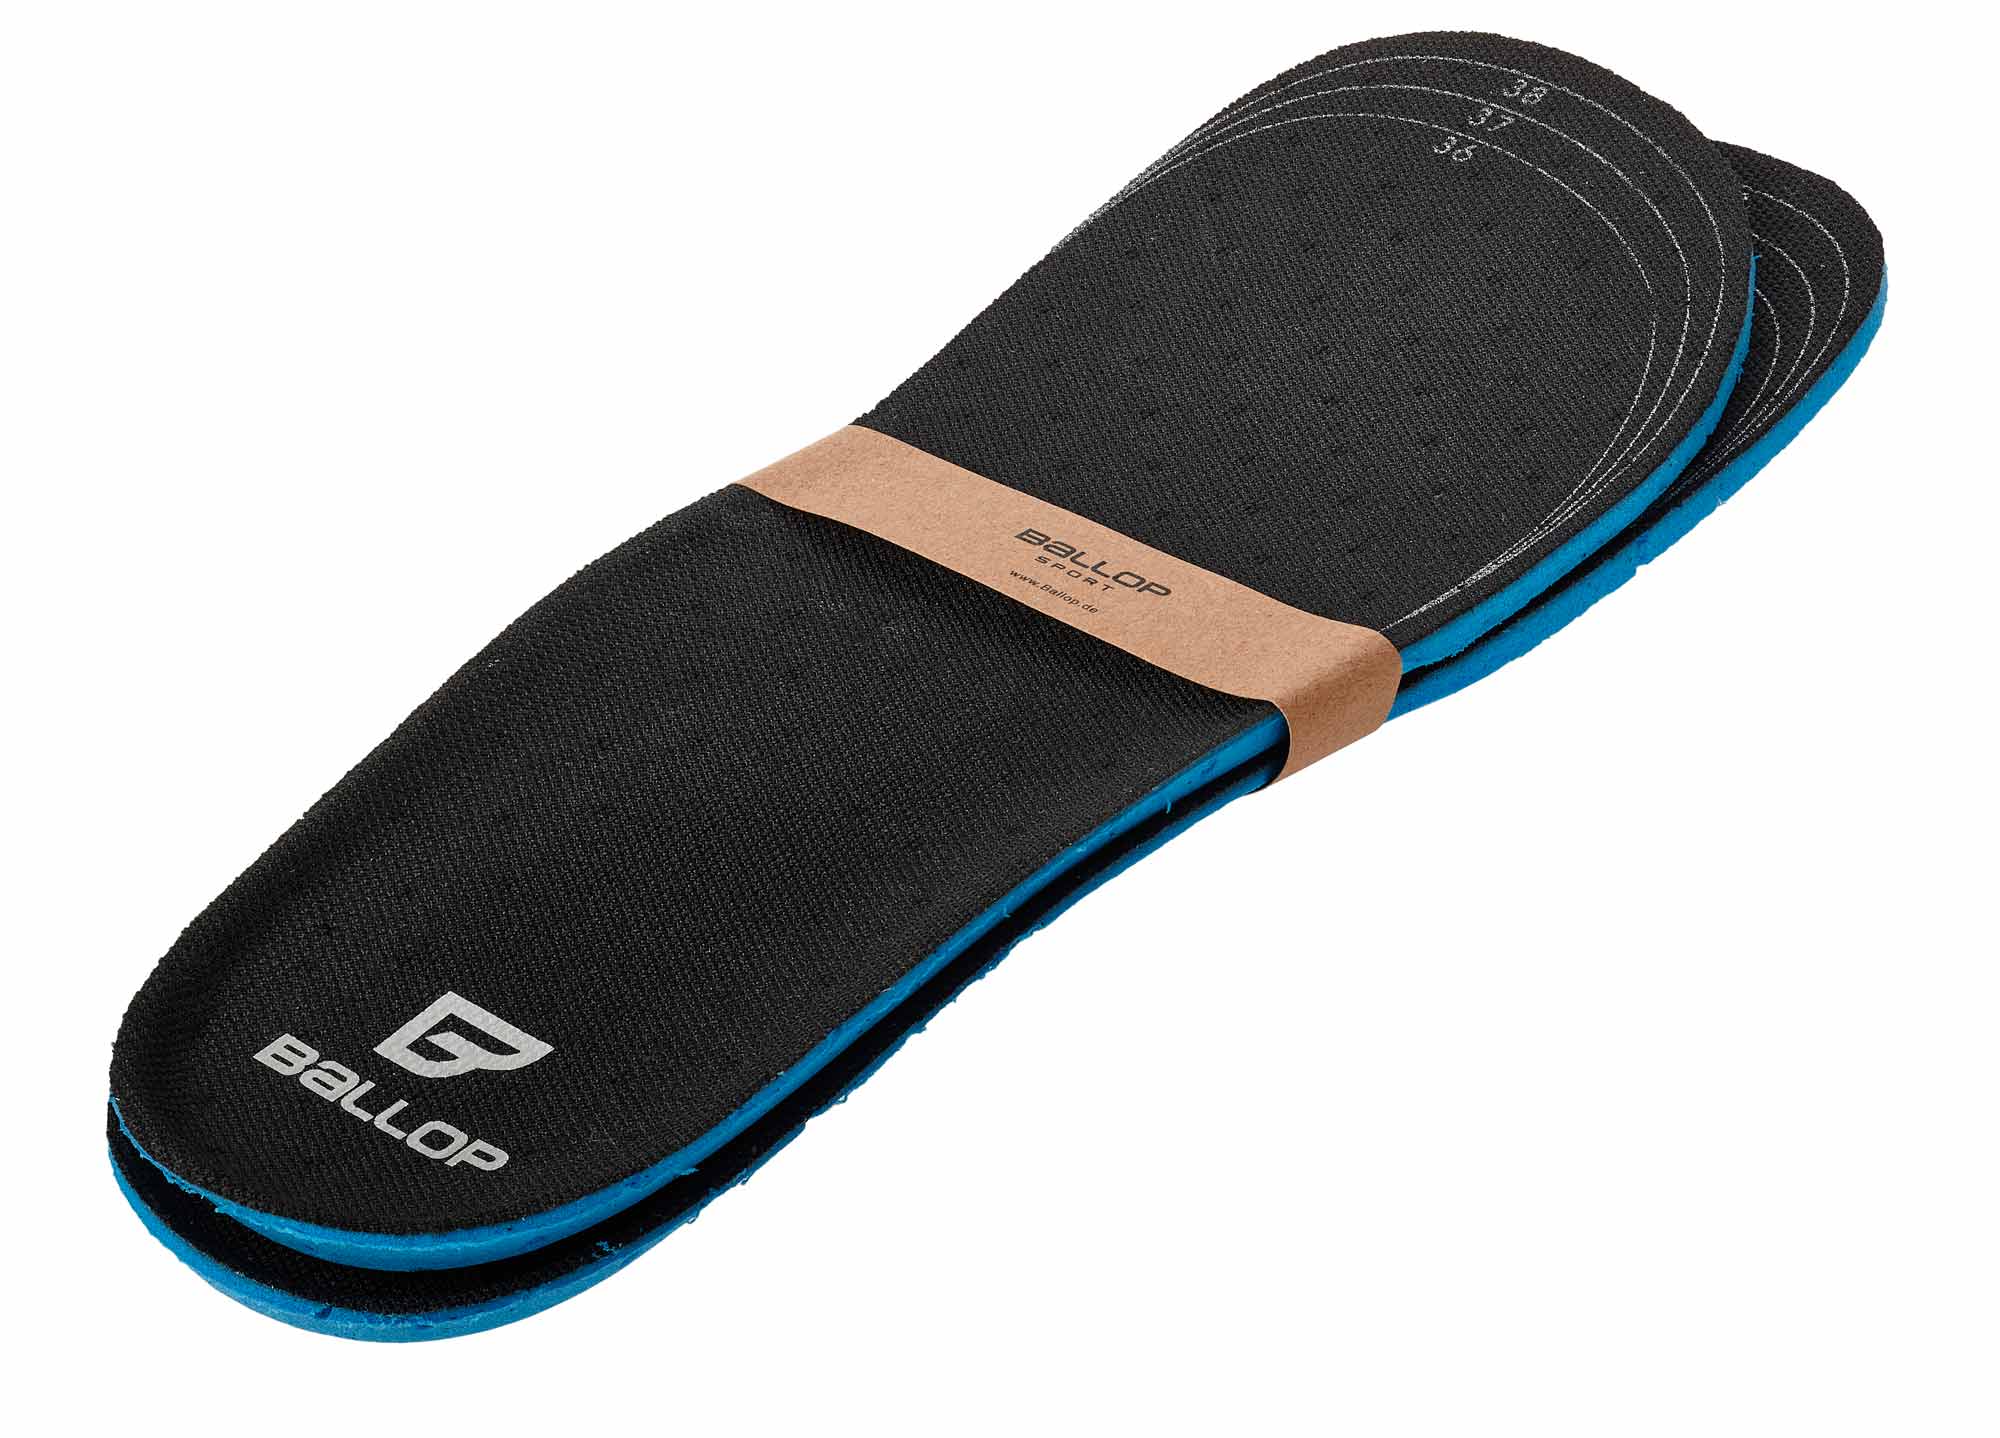 BALLOP Barefoot Comfort spare insoles 